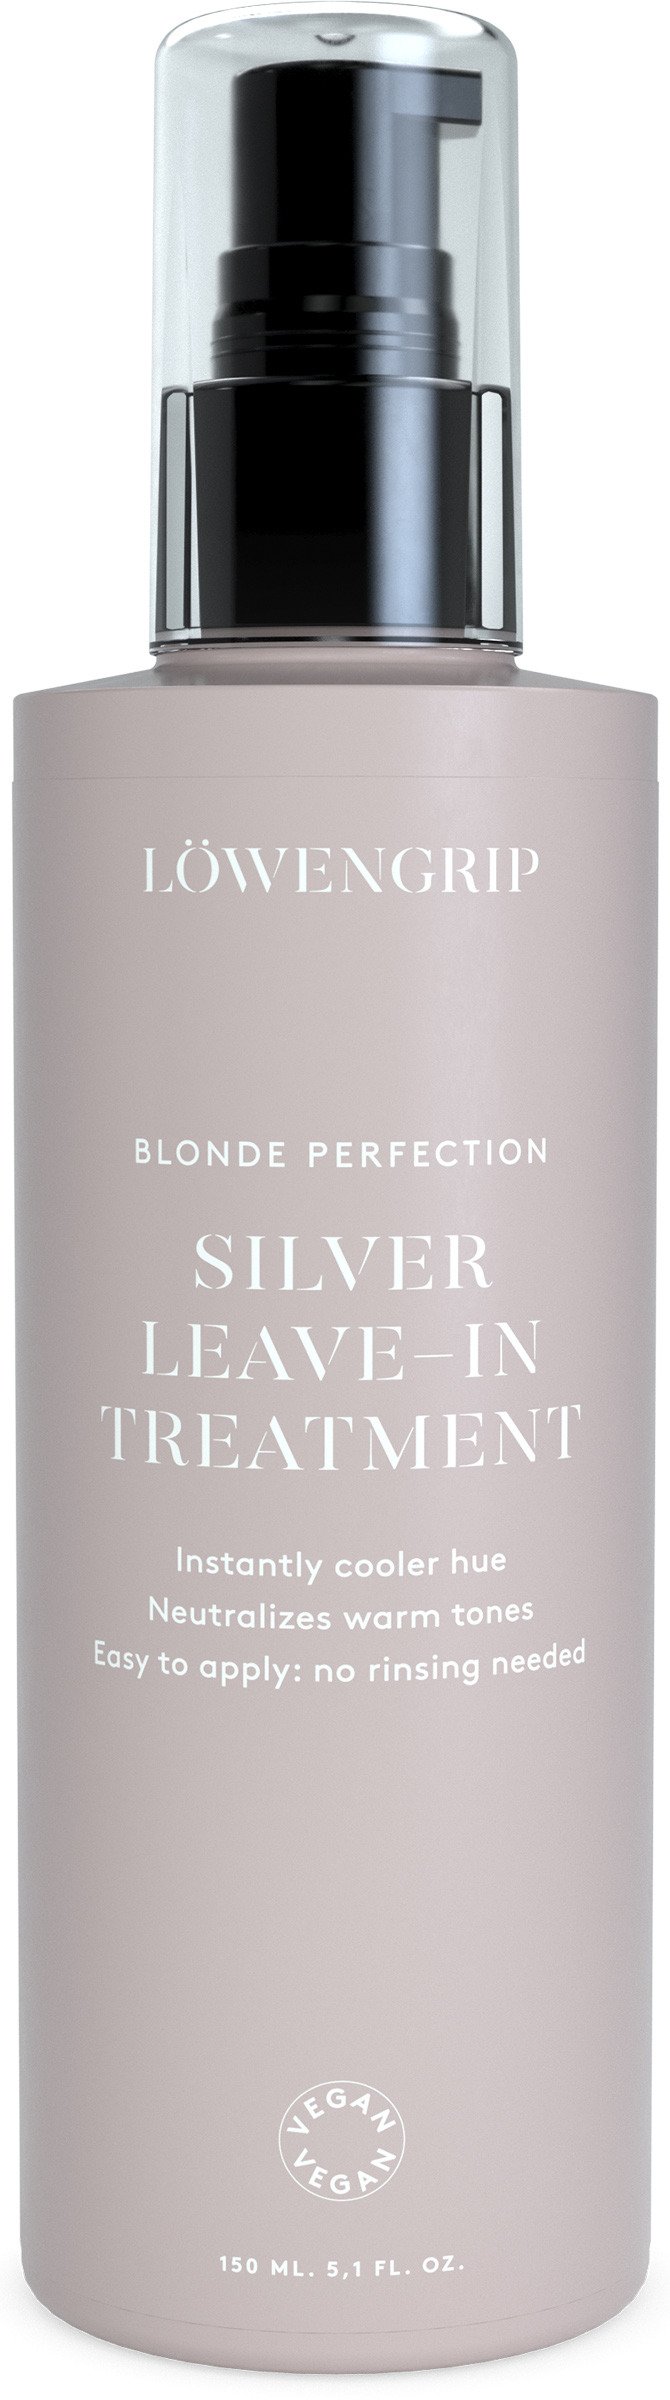 Löwengrip Blonde Perfection Silver Leave-In Treatment 150 ml